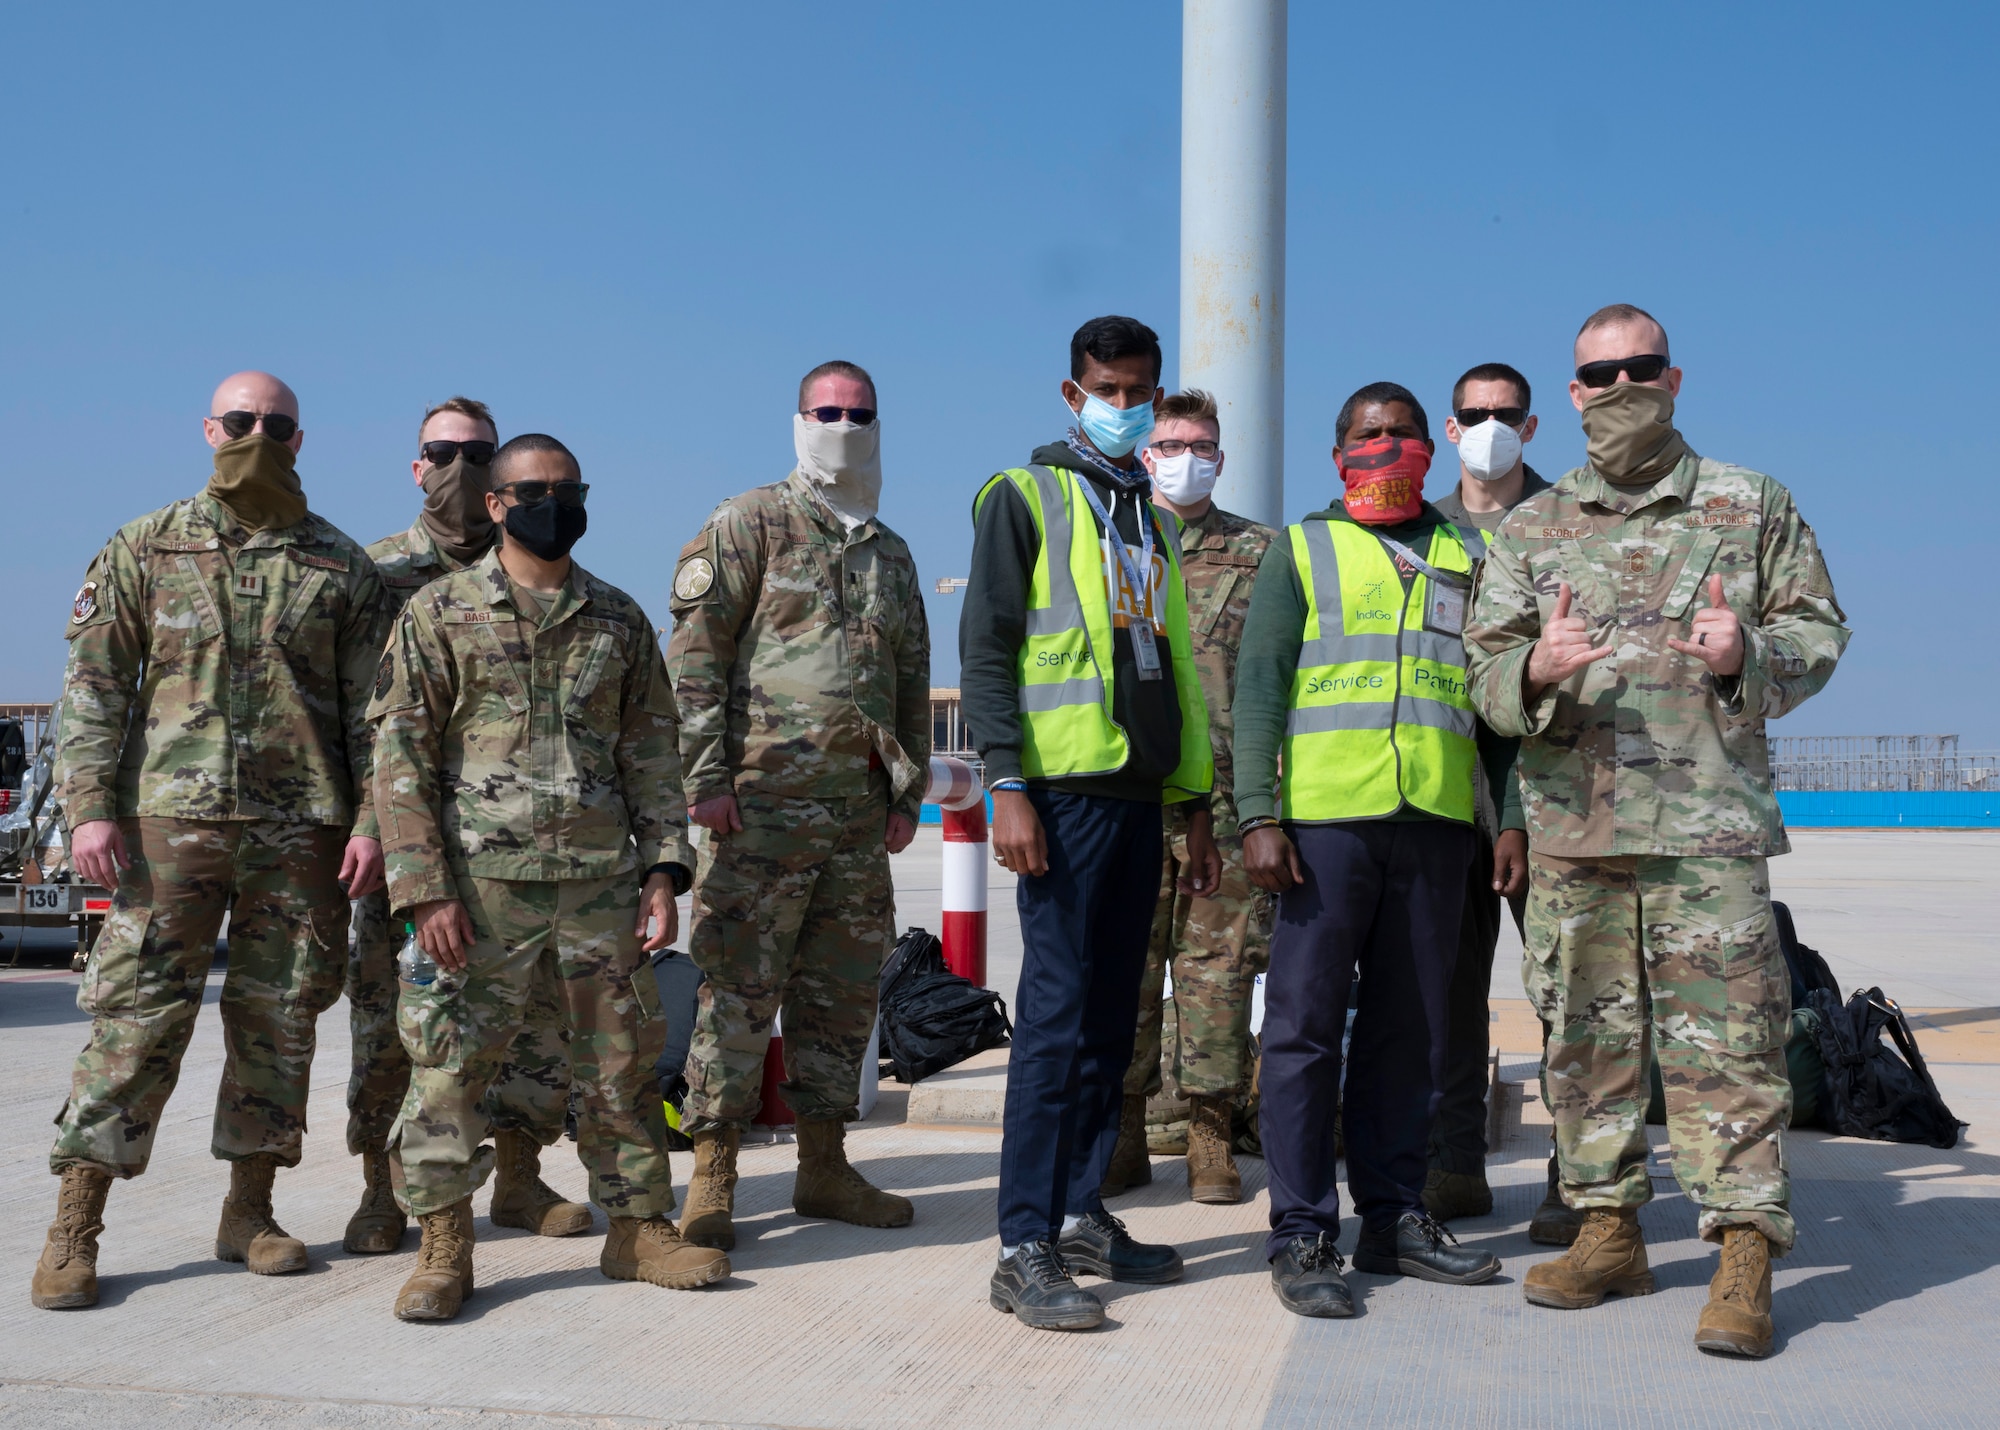 Airmen assigned to the 34th Expeditionary Bomb Squadron, Ellsworth Air Force Base, S.D., pose alongside Indian airfield operations specialists at Kempegowda International Airport in Bengaluru, India, Feb. 1, 2021. The 34th EBS is in India to support the B-1’s participation in Aero India 2021. Aero India provides the opportunity to build a stronger relationship between the United States and India, as well as with the international community. (U.S. Air Force photo by Senior Airman Christina Bennett)